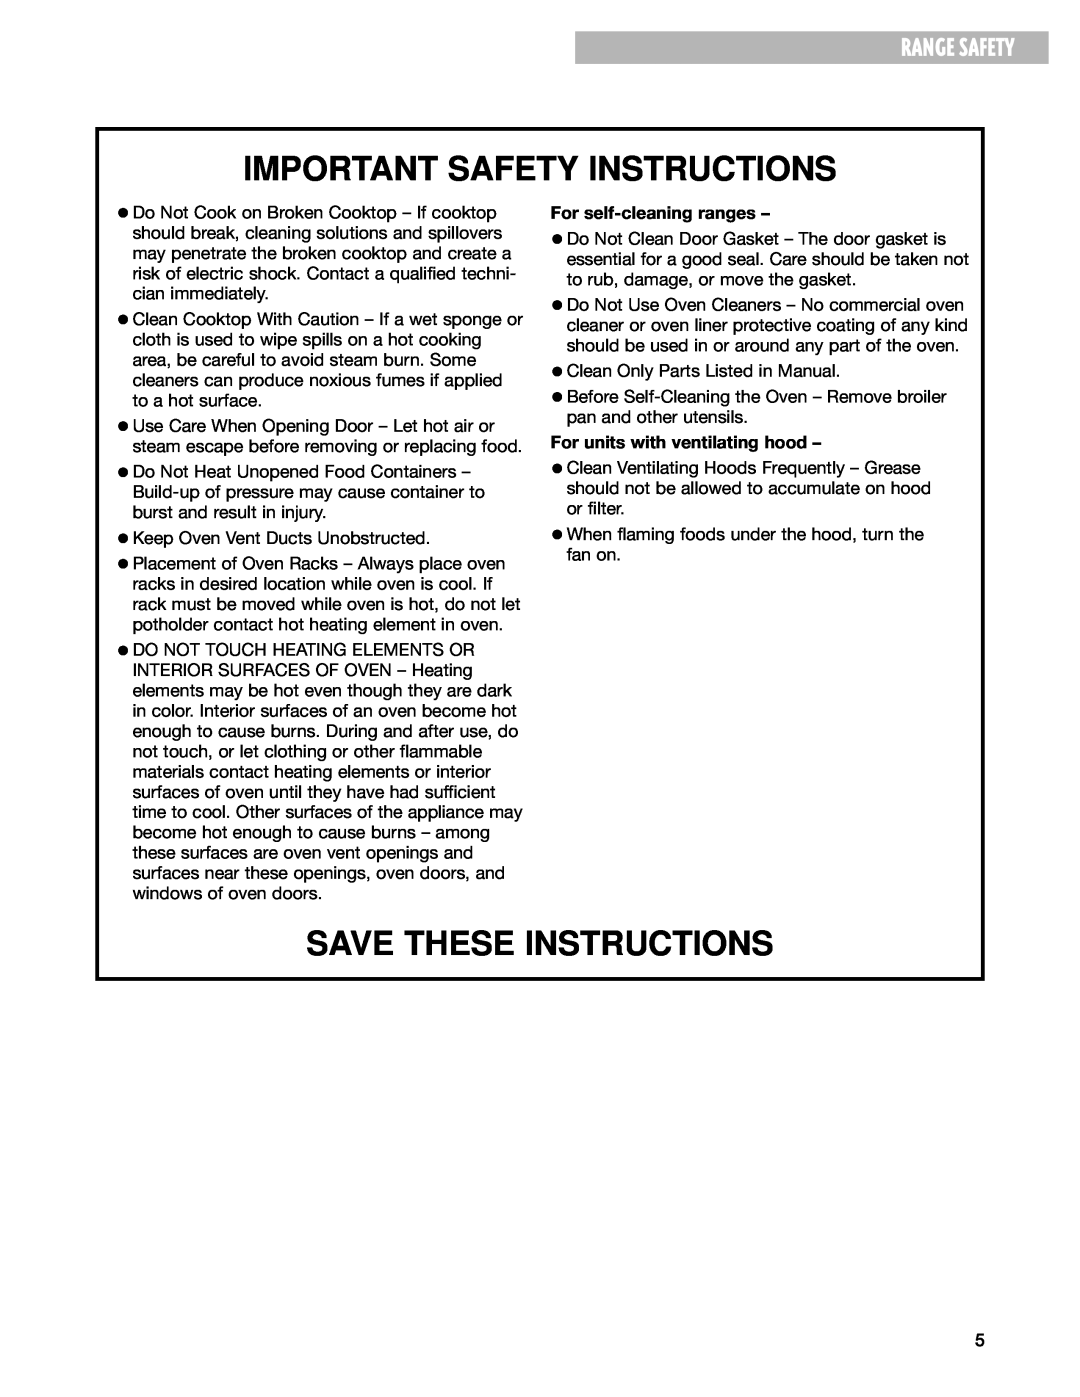 Whirlpool RF344BXH warranty Important Safety Instructions, Save These Instructions, Range Safety, For self-cleaning ranges 